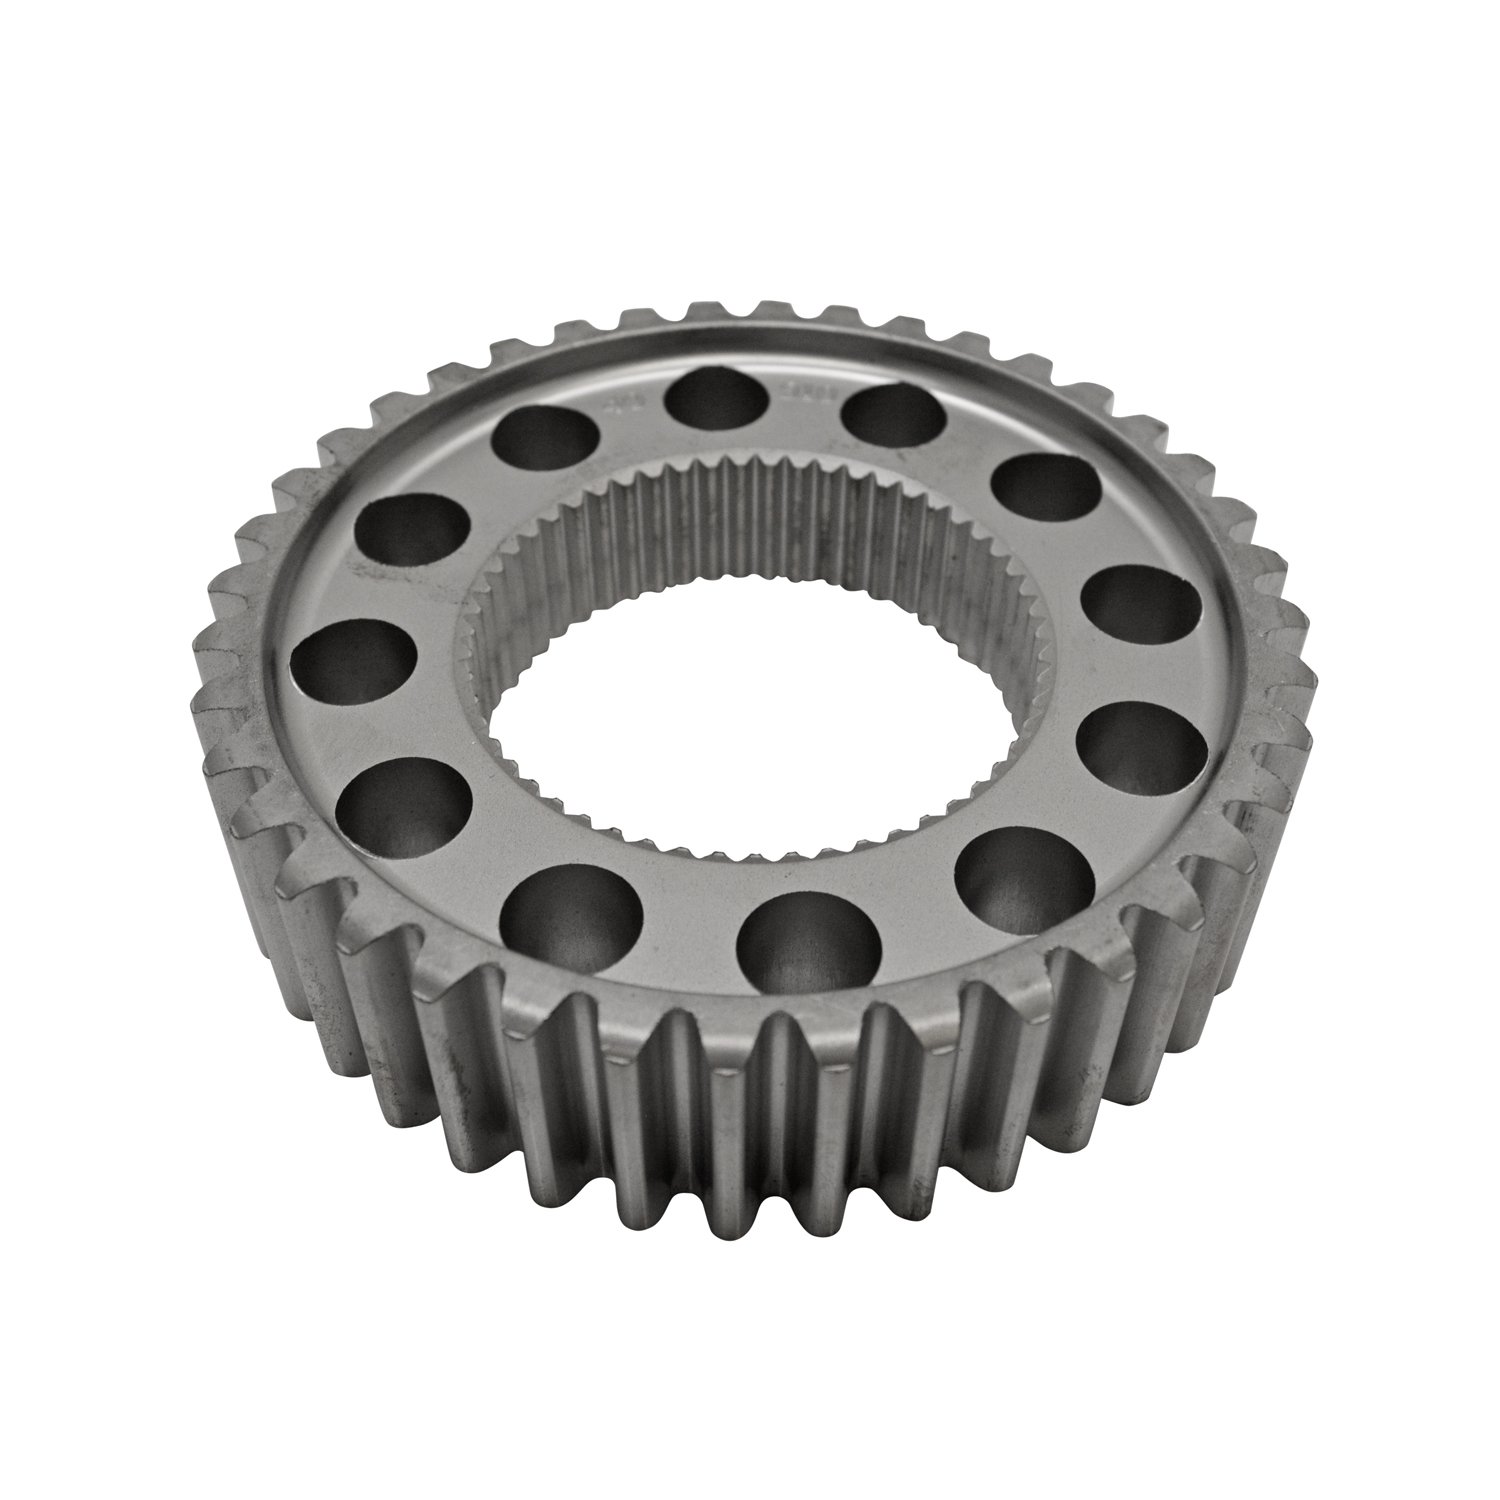 USA Standard 76246 Transfer Case Np261, Np263Xhd, Np271 & Np273 Drive / Driven Sprocket 1.5 in. Wide